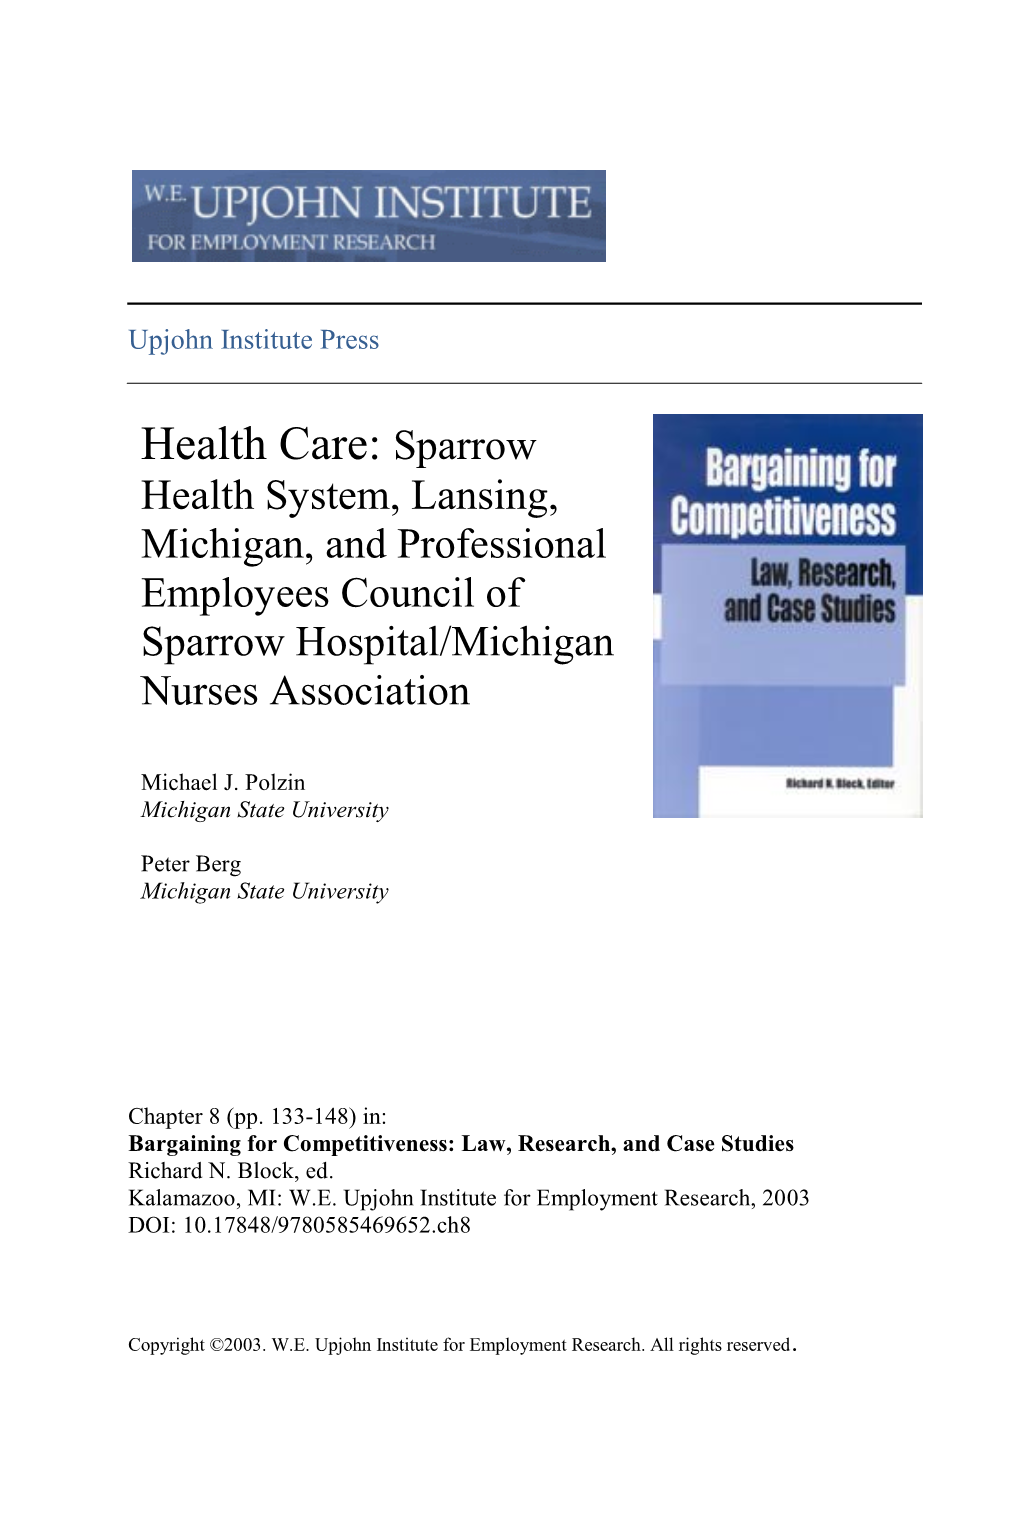 Health Care: Sparrow Health System, Lansing, Michigan, and Professional Employees Council of Sparrow Hospital/Michigan Nurses Association